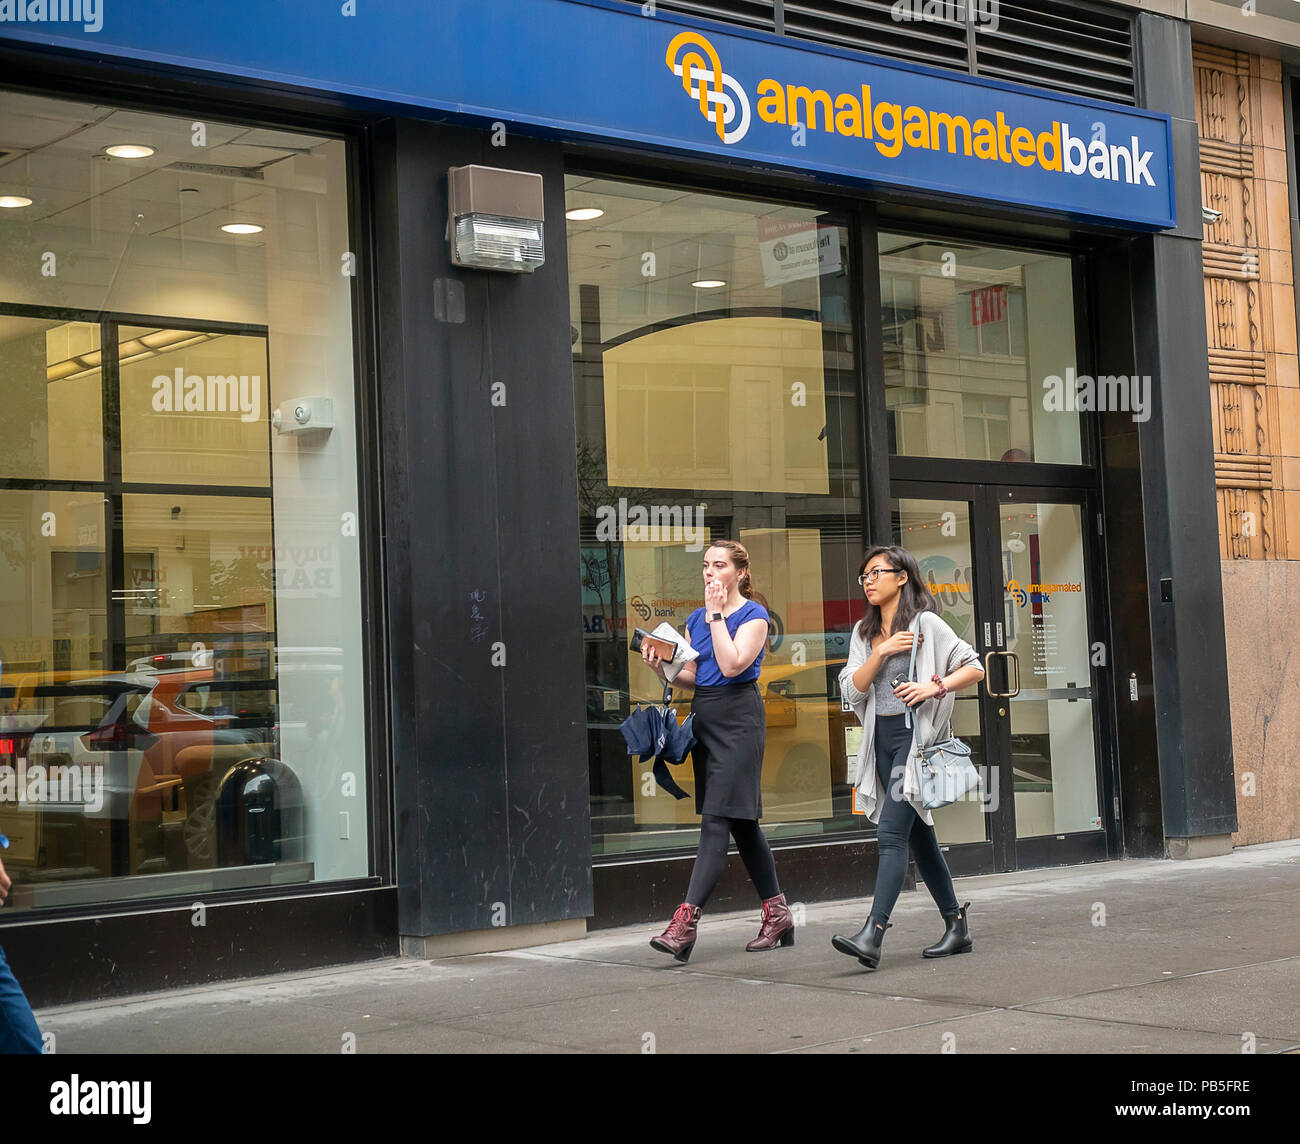 The Amalgamated Bank of New York branch in Chelsea in New York on Monday,  July 23, 2018. The socially responsible bank is reported to have filed for  an initial public offering. (Â©